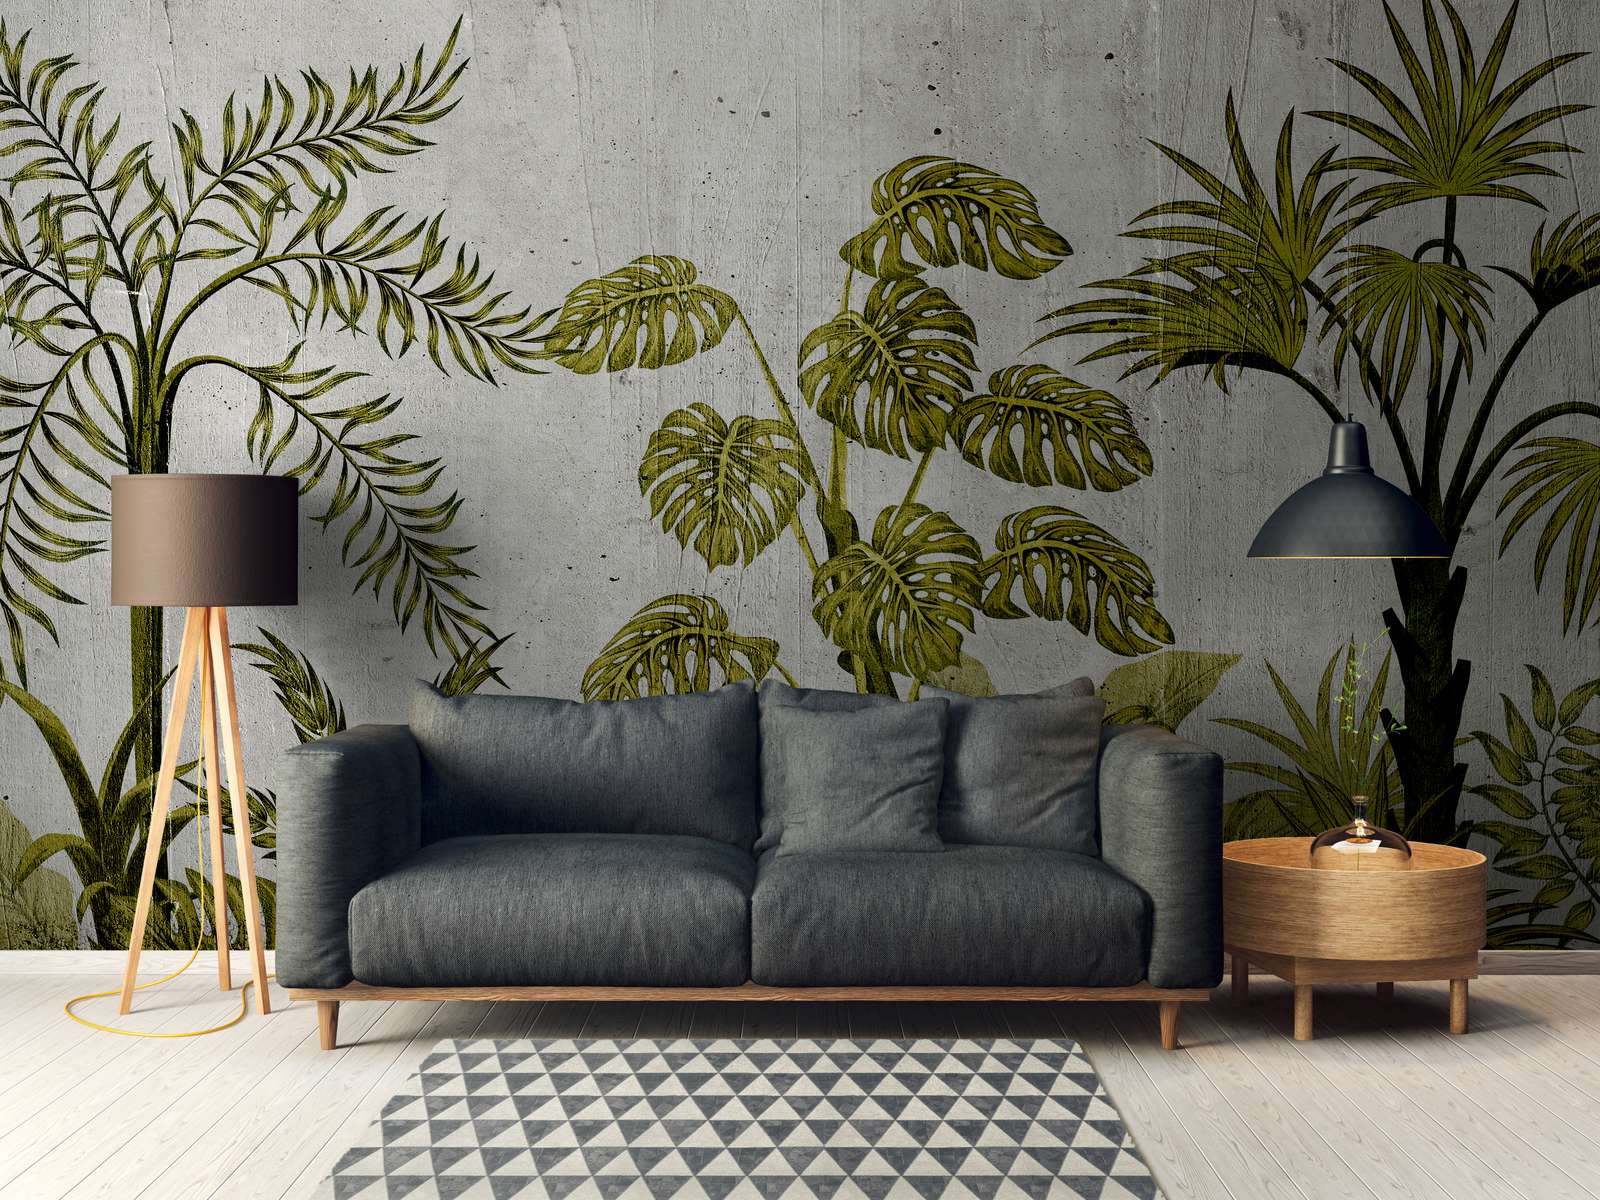             Photo wallpaper with jungle motif on concrete background - green, grey
        